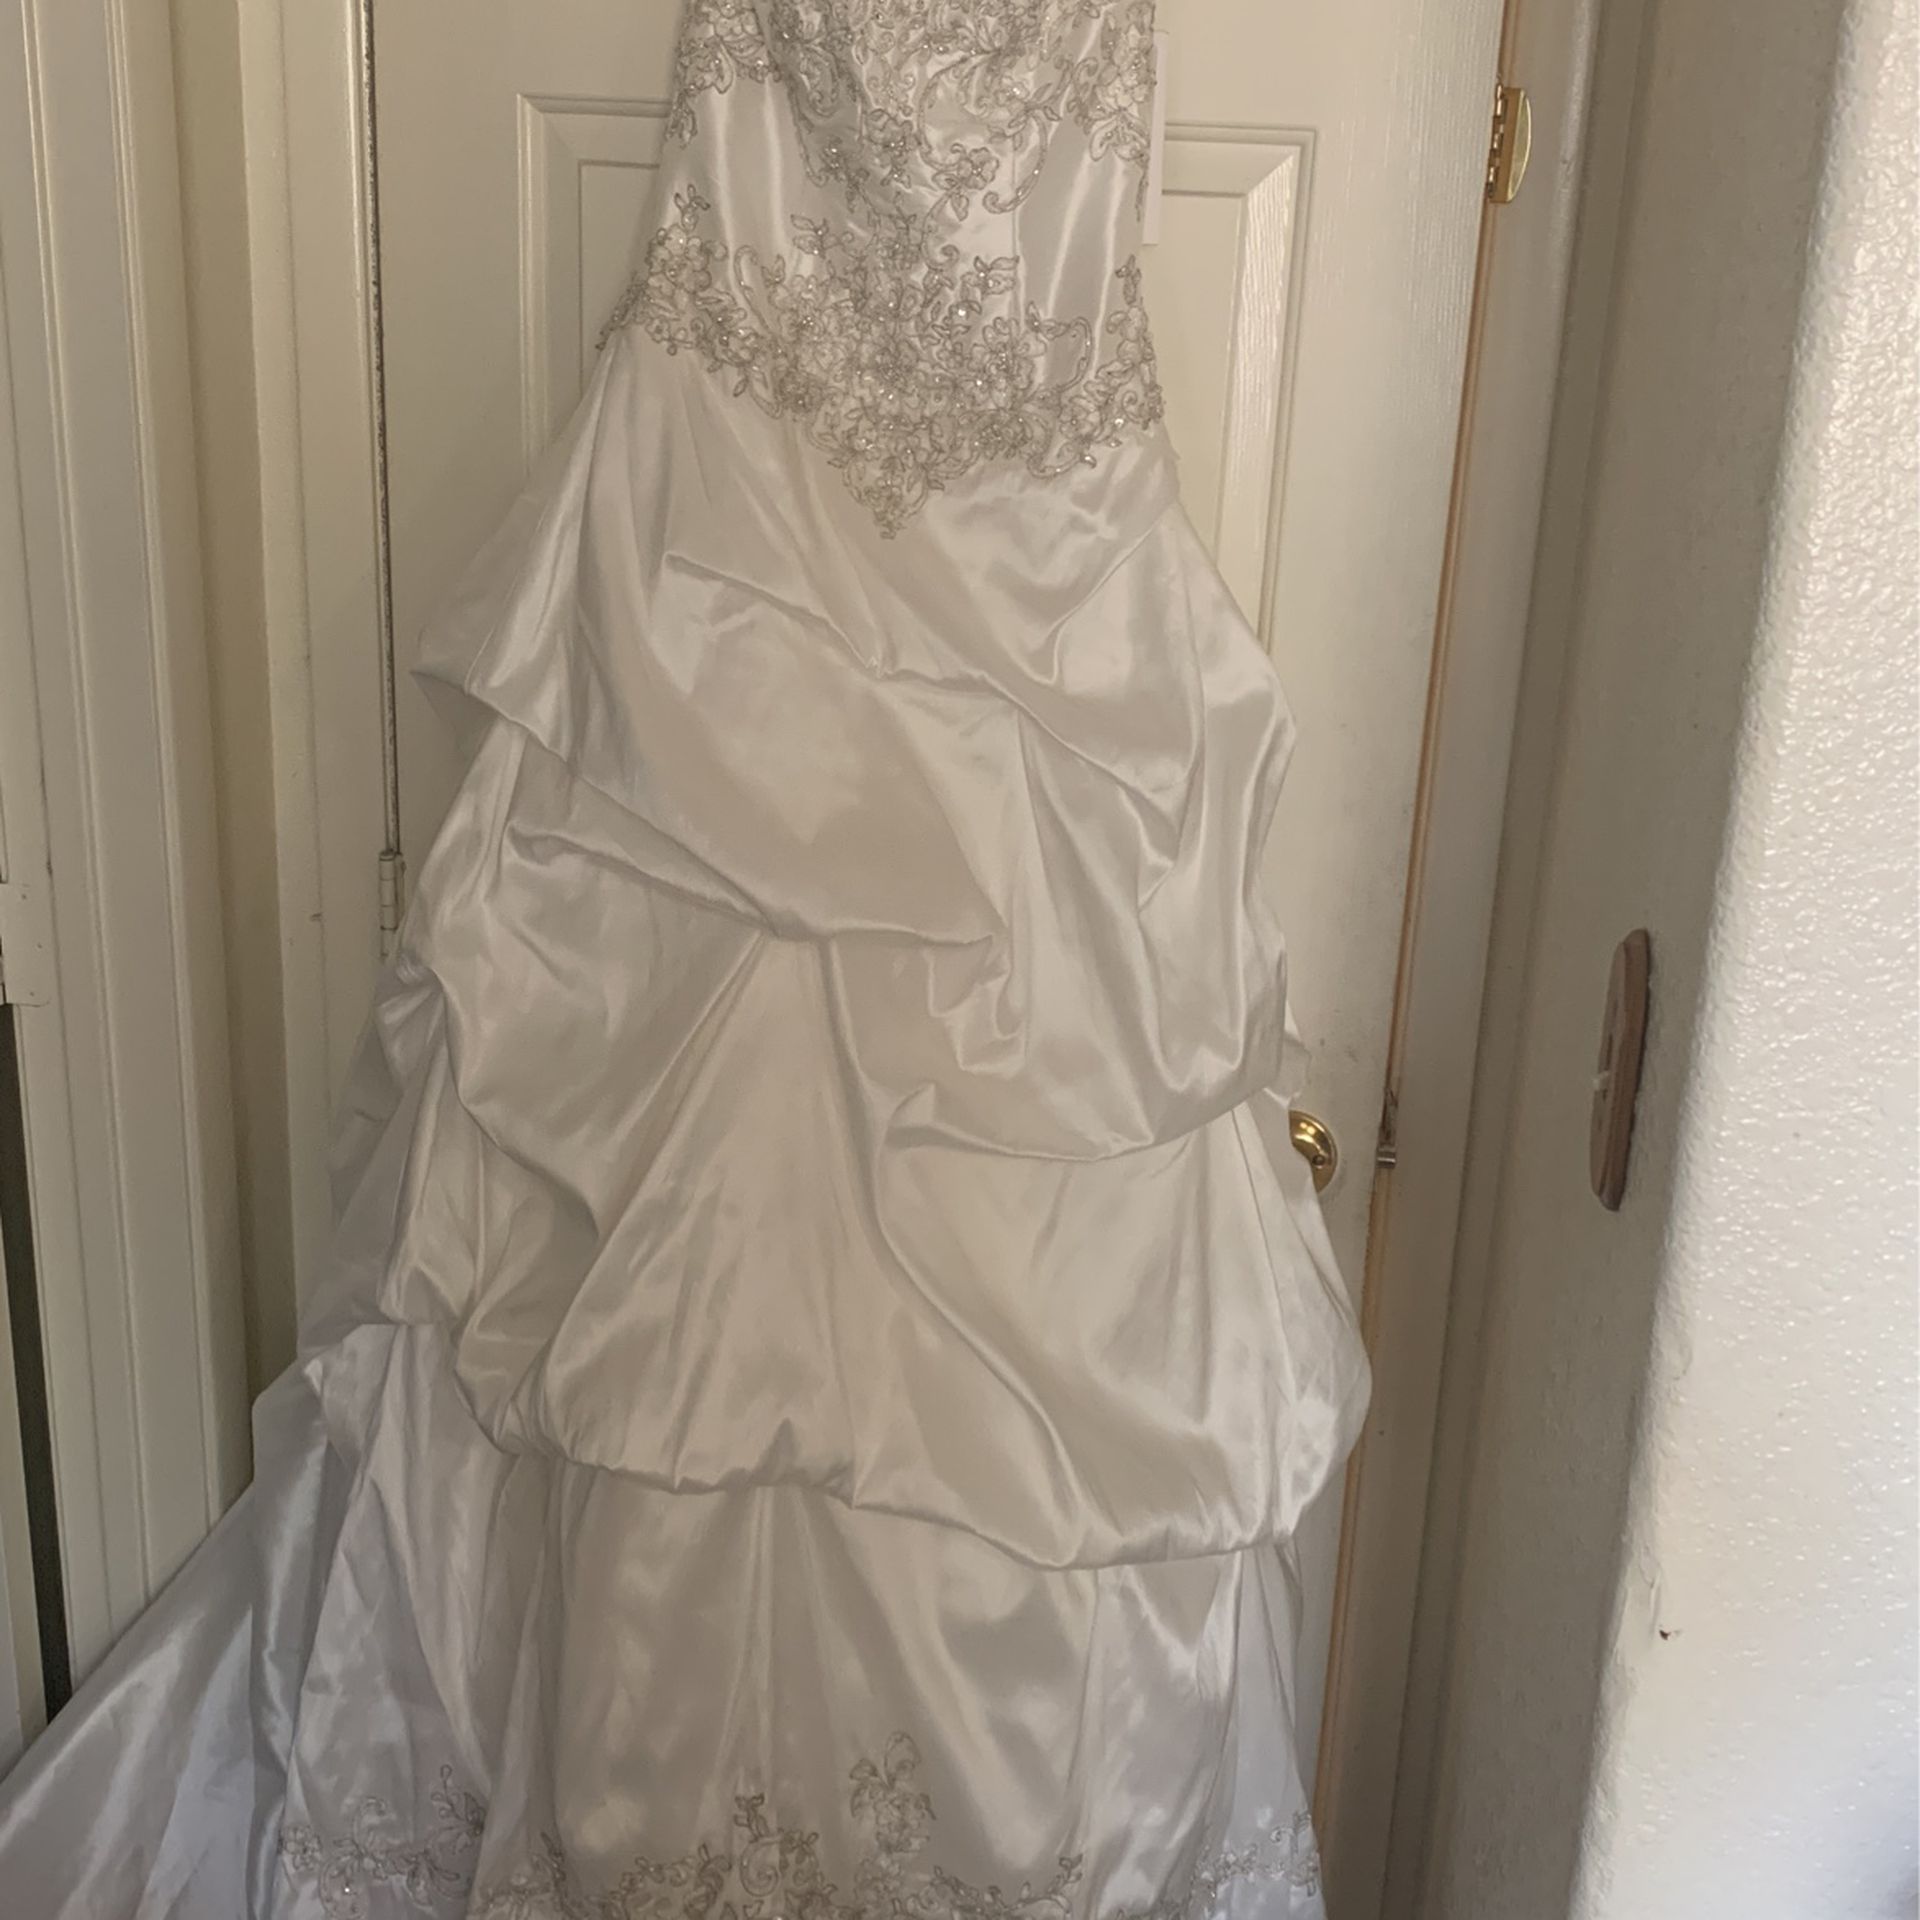 Davids Bridal Beautiful Brand New For Only 75.00